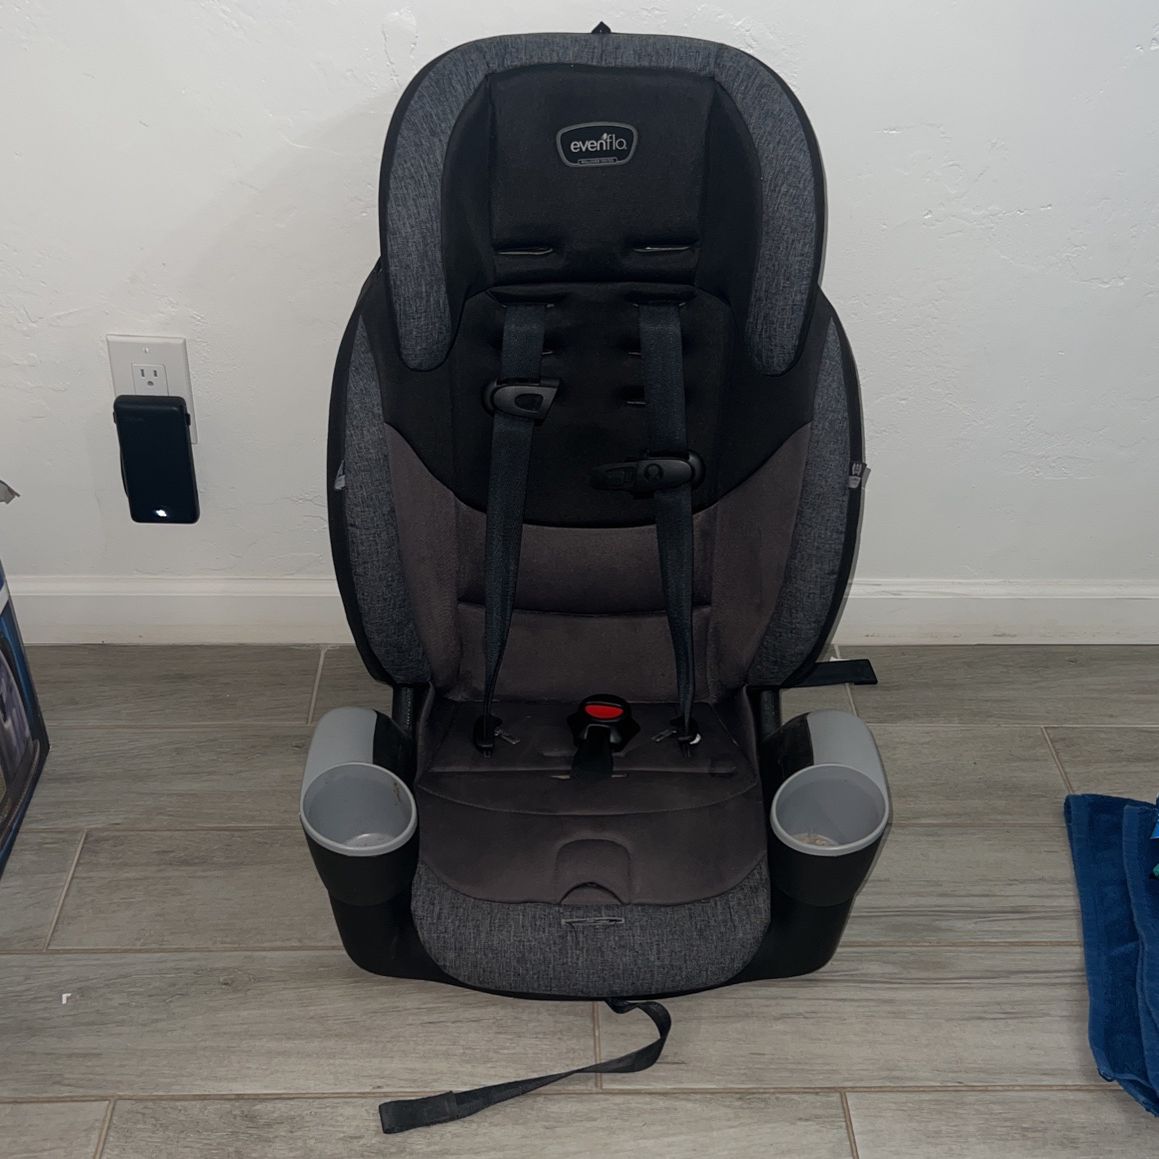 Even flo 4in1 Car seat 